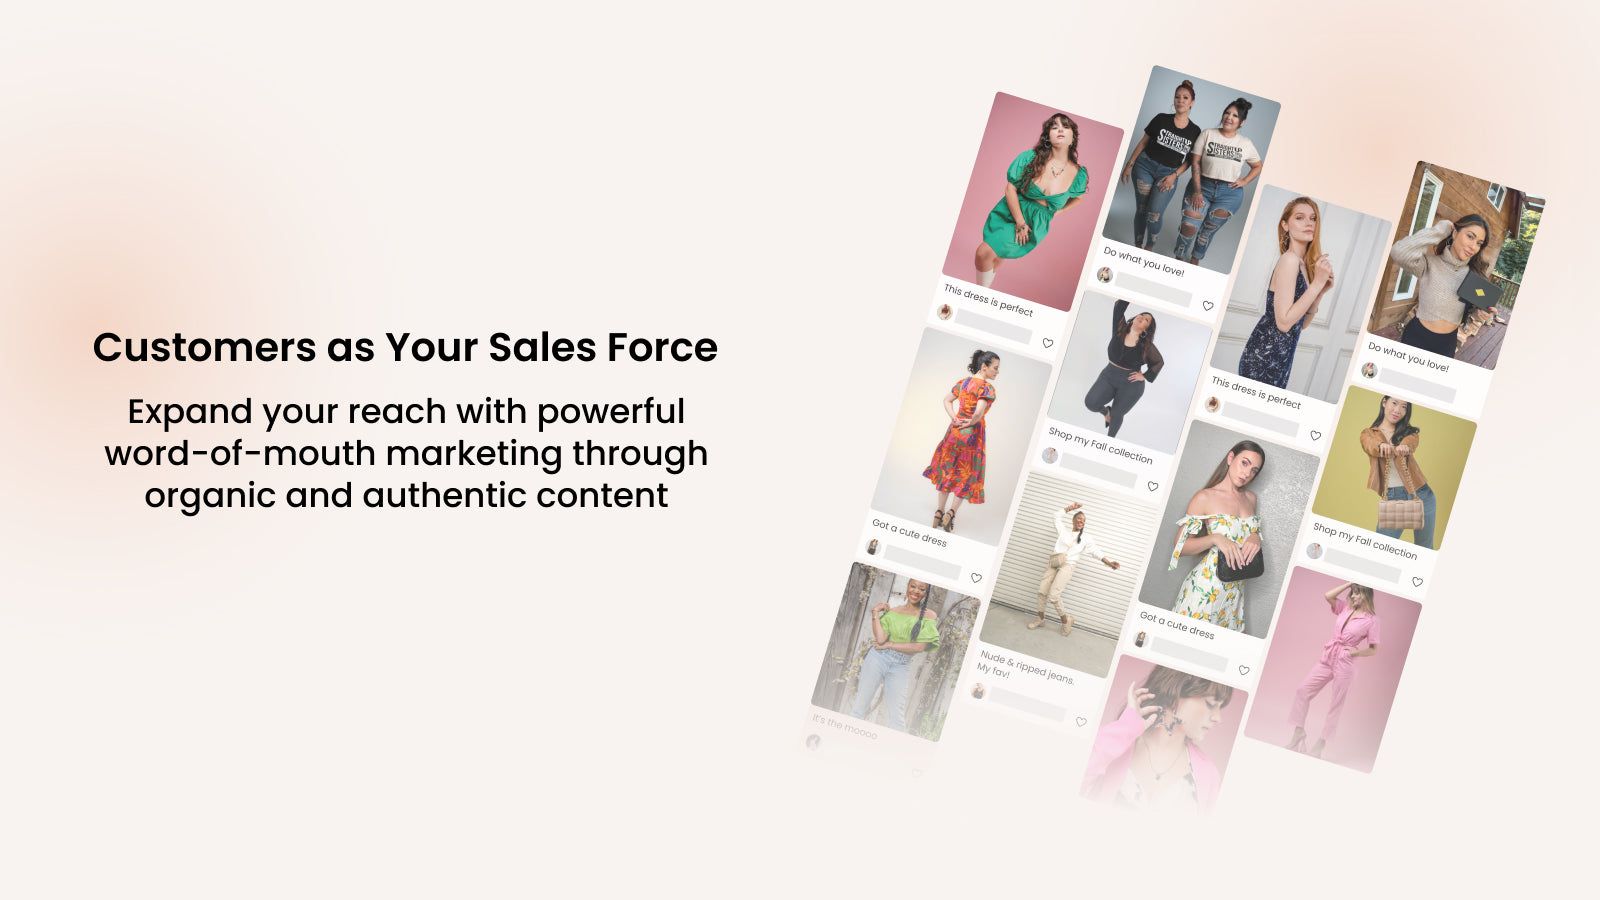 Customers as Your Sales Force